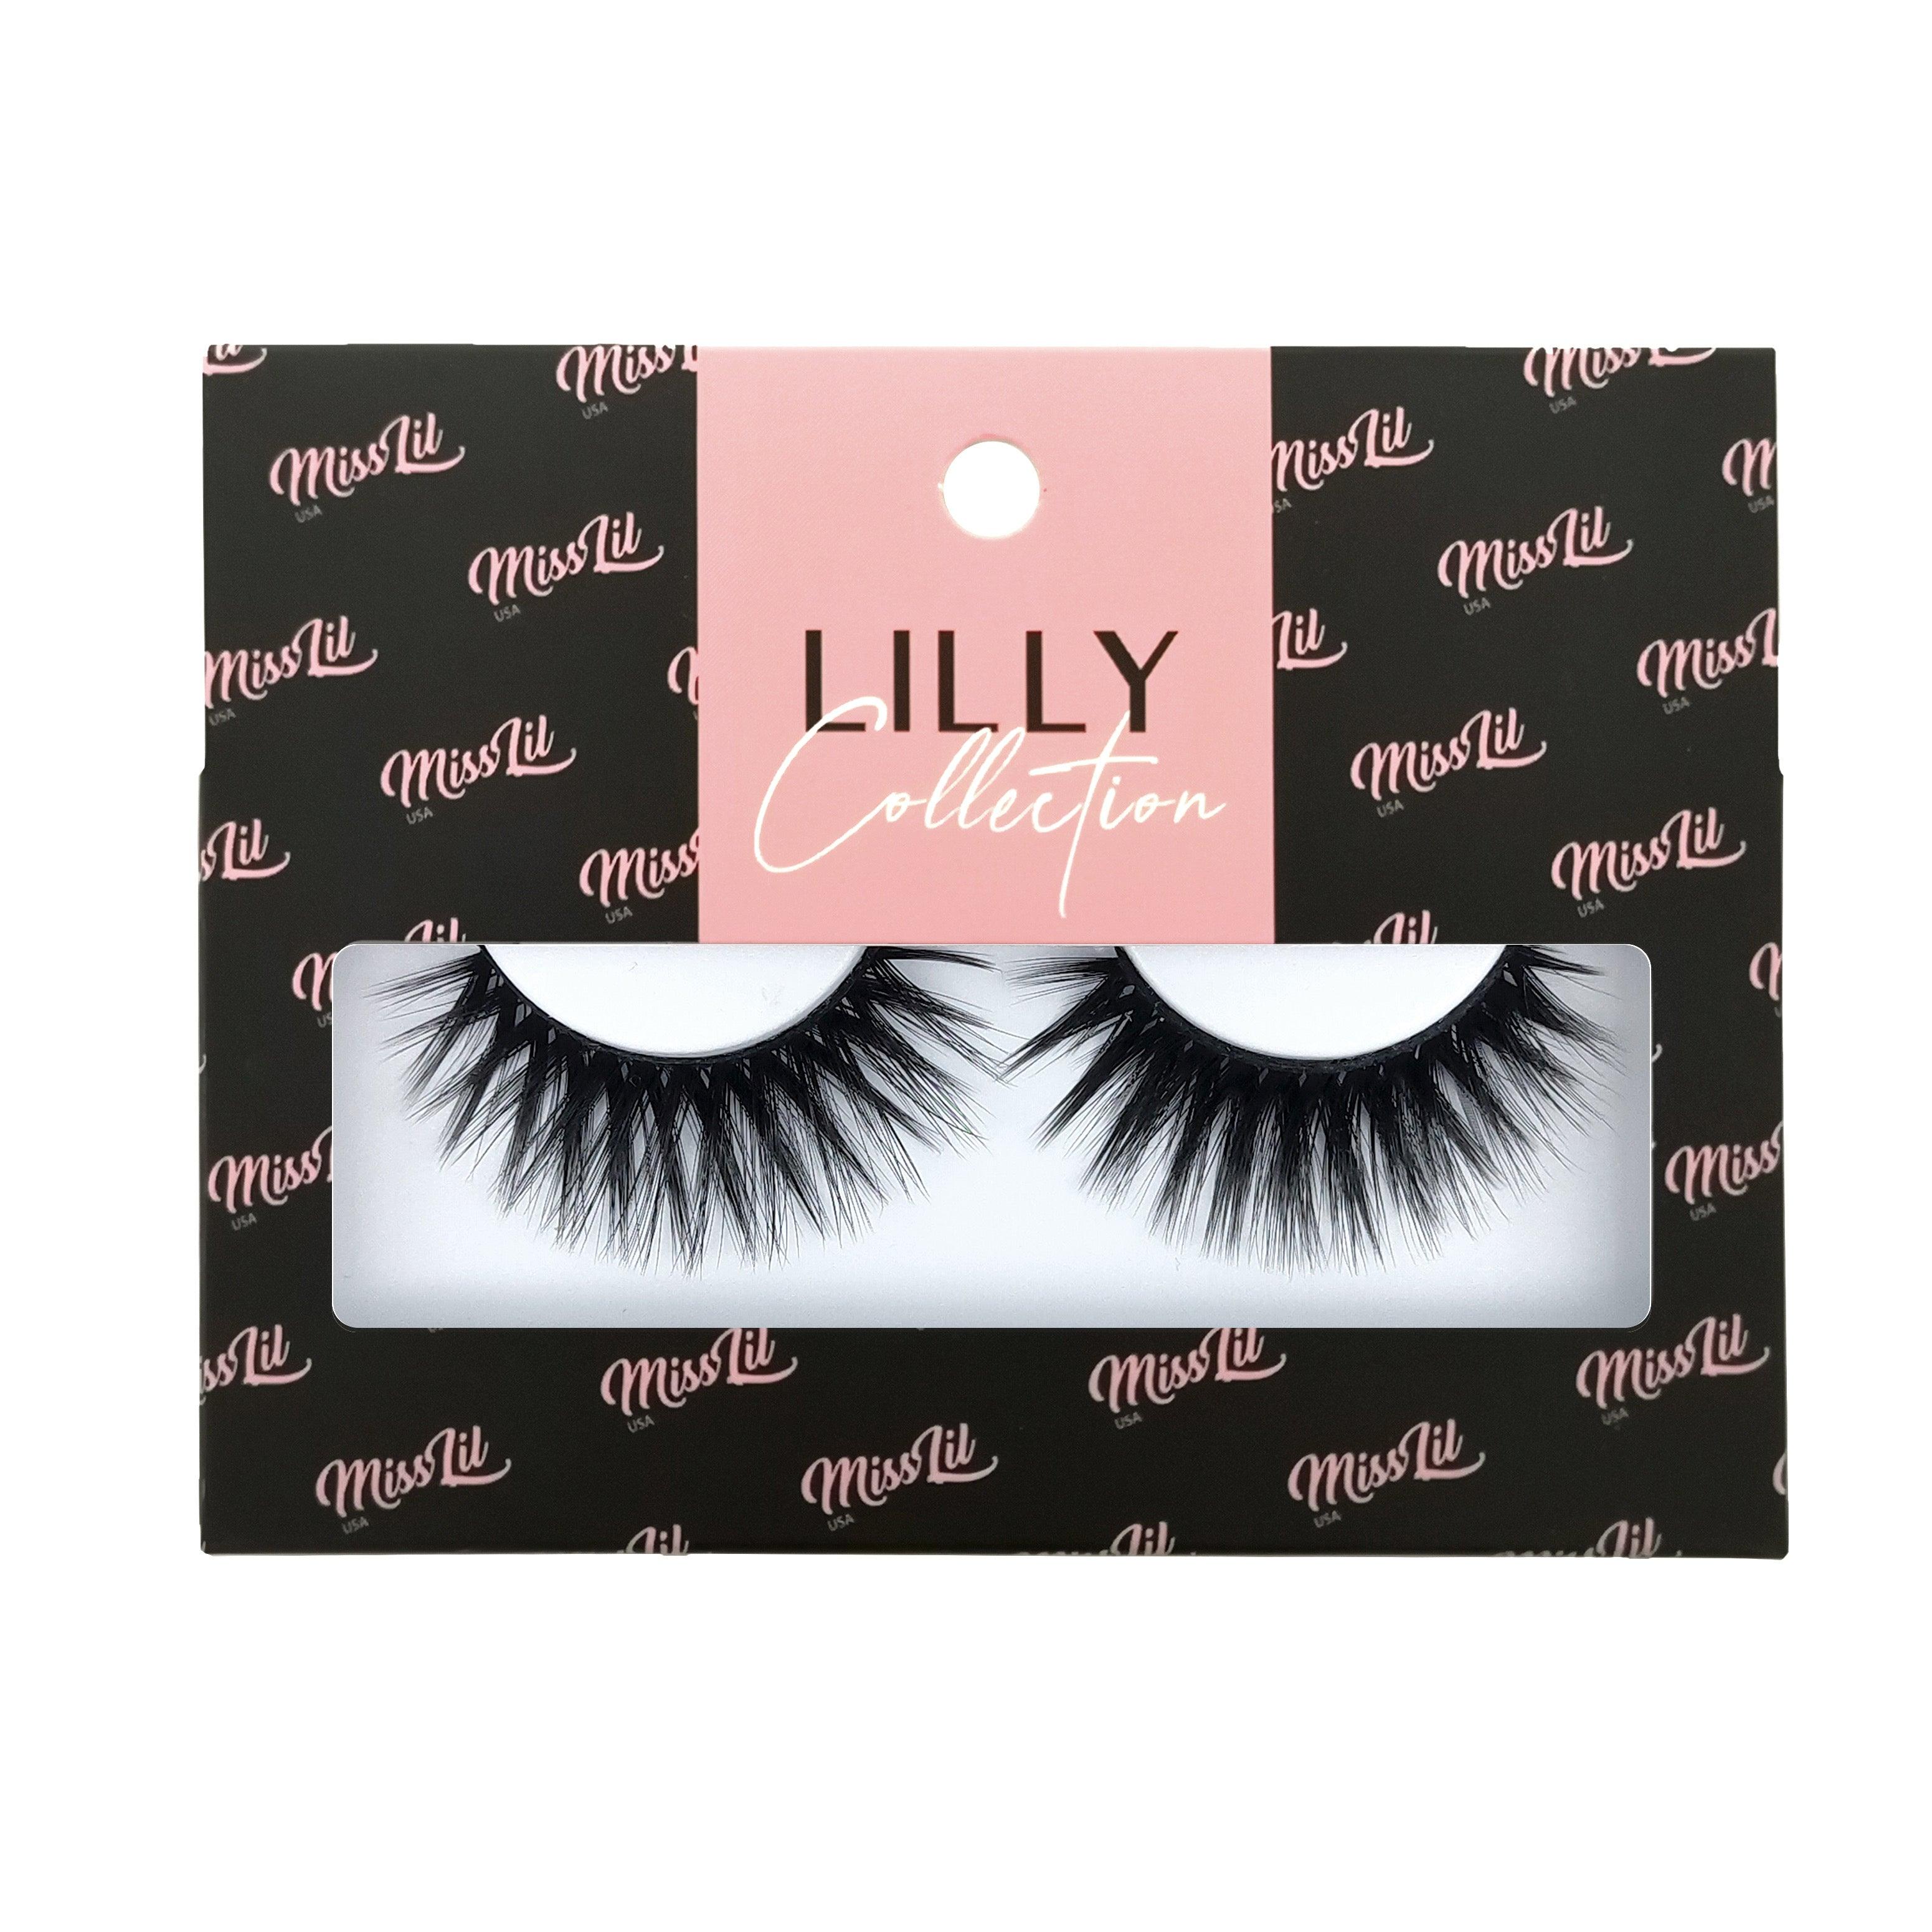 1-Pair Lashes-Lilly Collection #1 (Pack of 12) - Miss Lil USA Wholesale